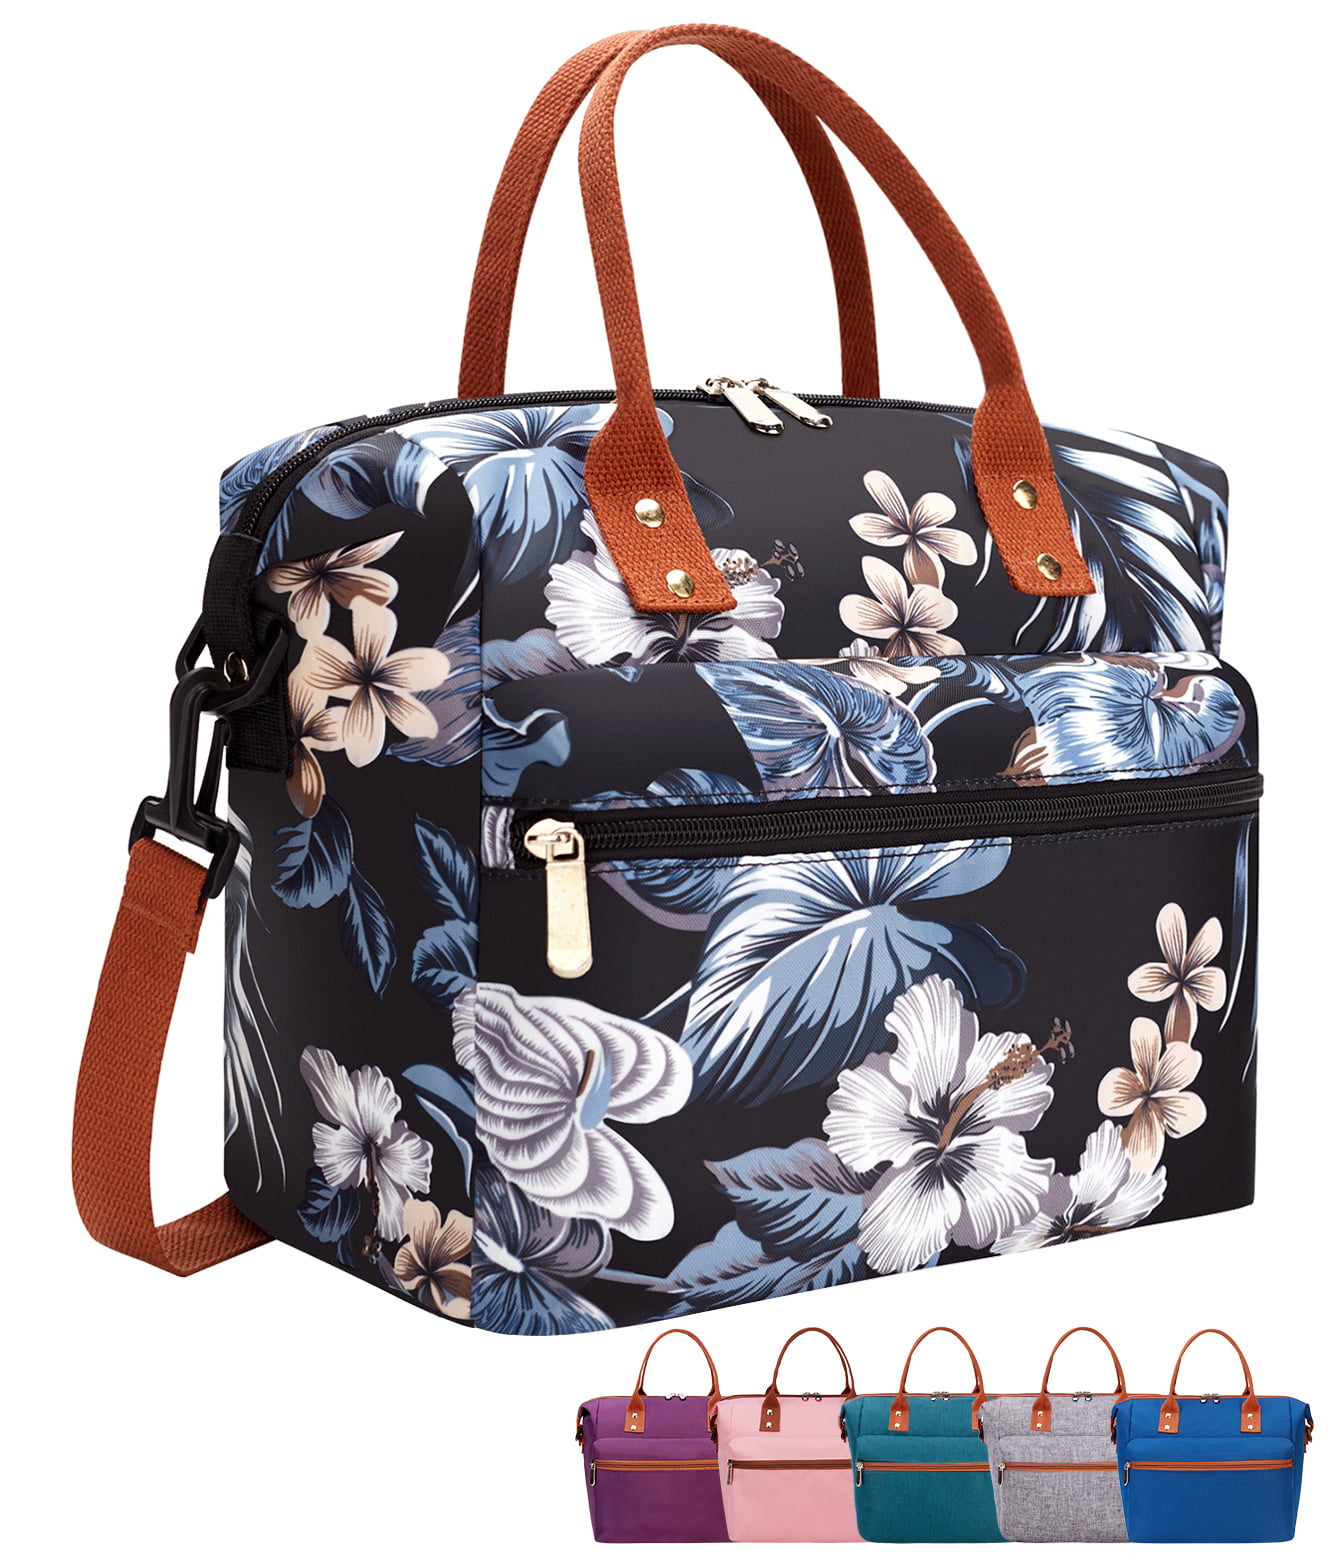 Lunch Bag Reusable Cooler Bag Lunch Box Containers Insulated Lunchbox Tote Bag Water-resistant Leakproof Womens Mens Office Work School Hiking Picnic Fishing Blue Peony with Upgrade Insulated Lining